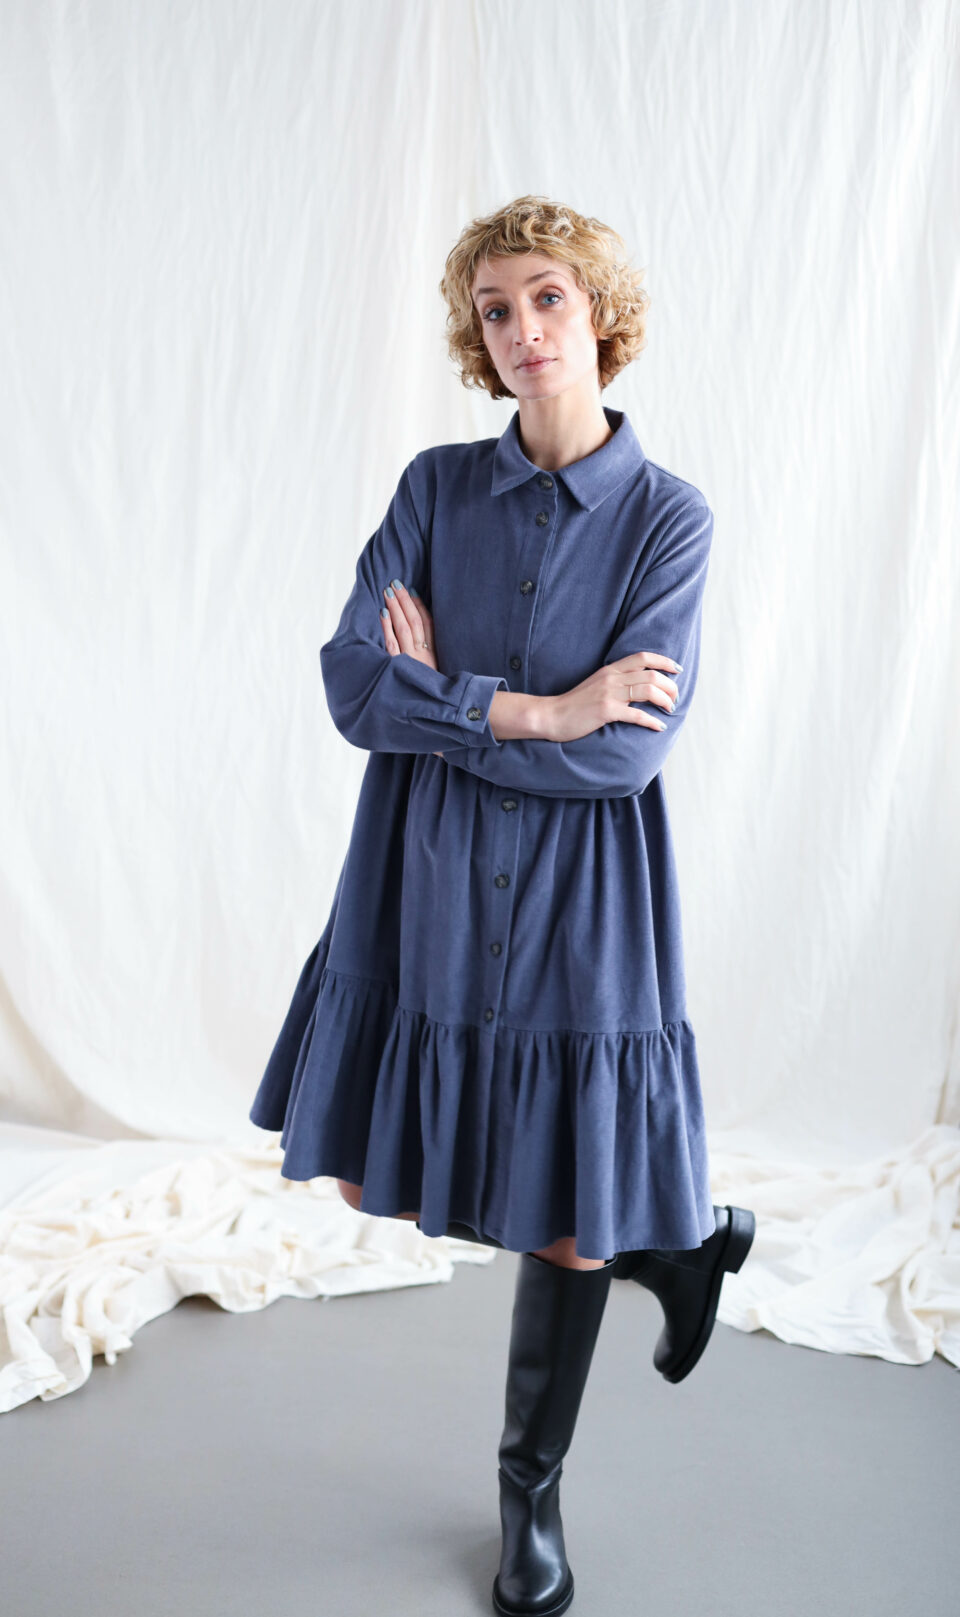 Needlecord tiered dress LOUISE | Dress | Sustainable clothing | OffOn clothing